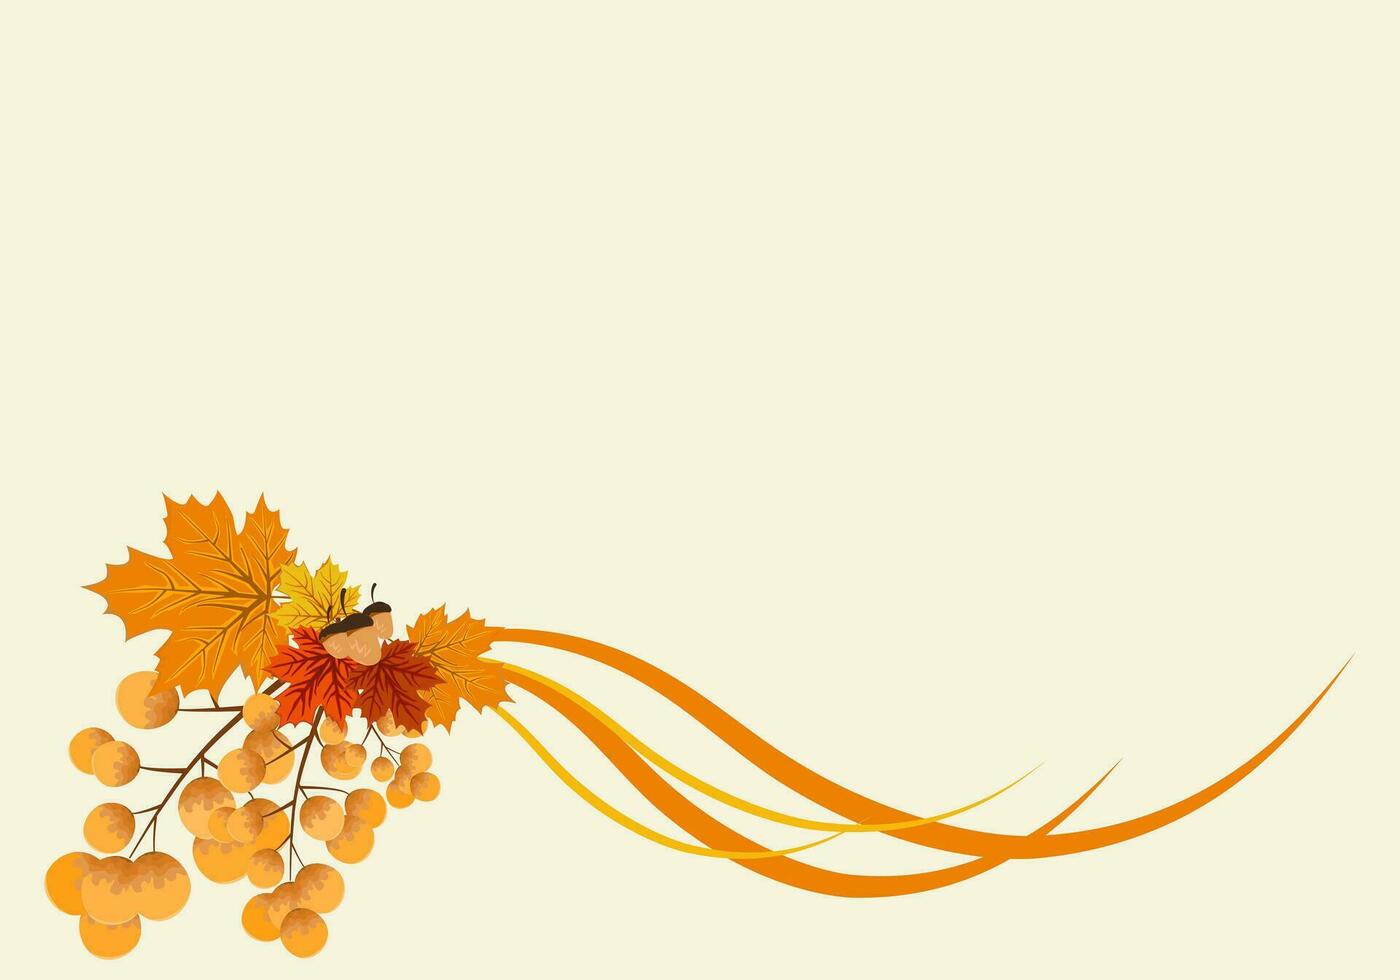 Autumn background with leaves golden yellow. fall concept,For wallpaper, postcards, greeting cards, website pages, banners, online sales. Vector illustration